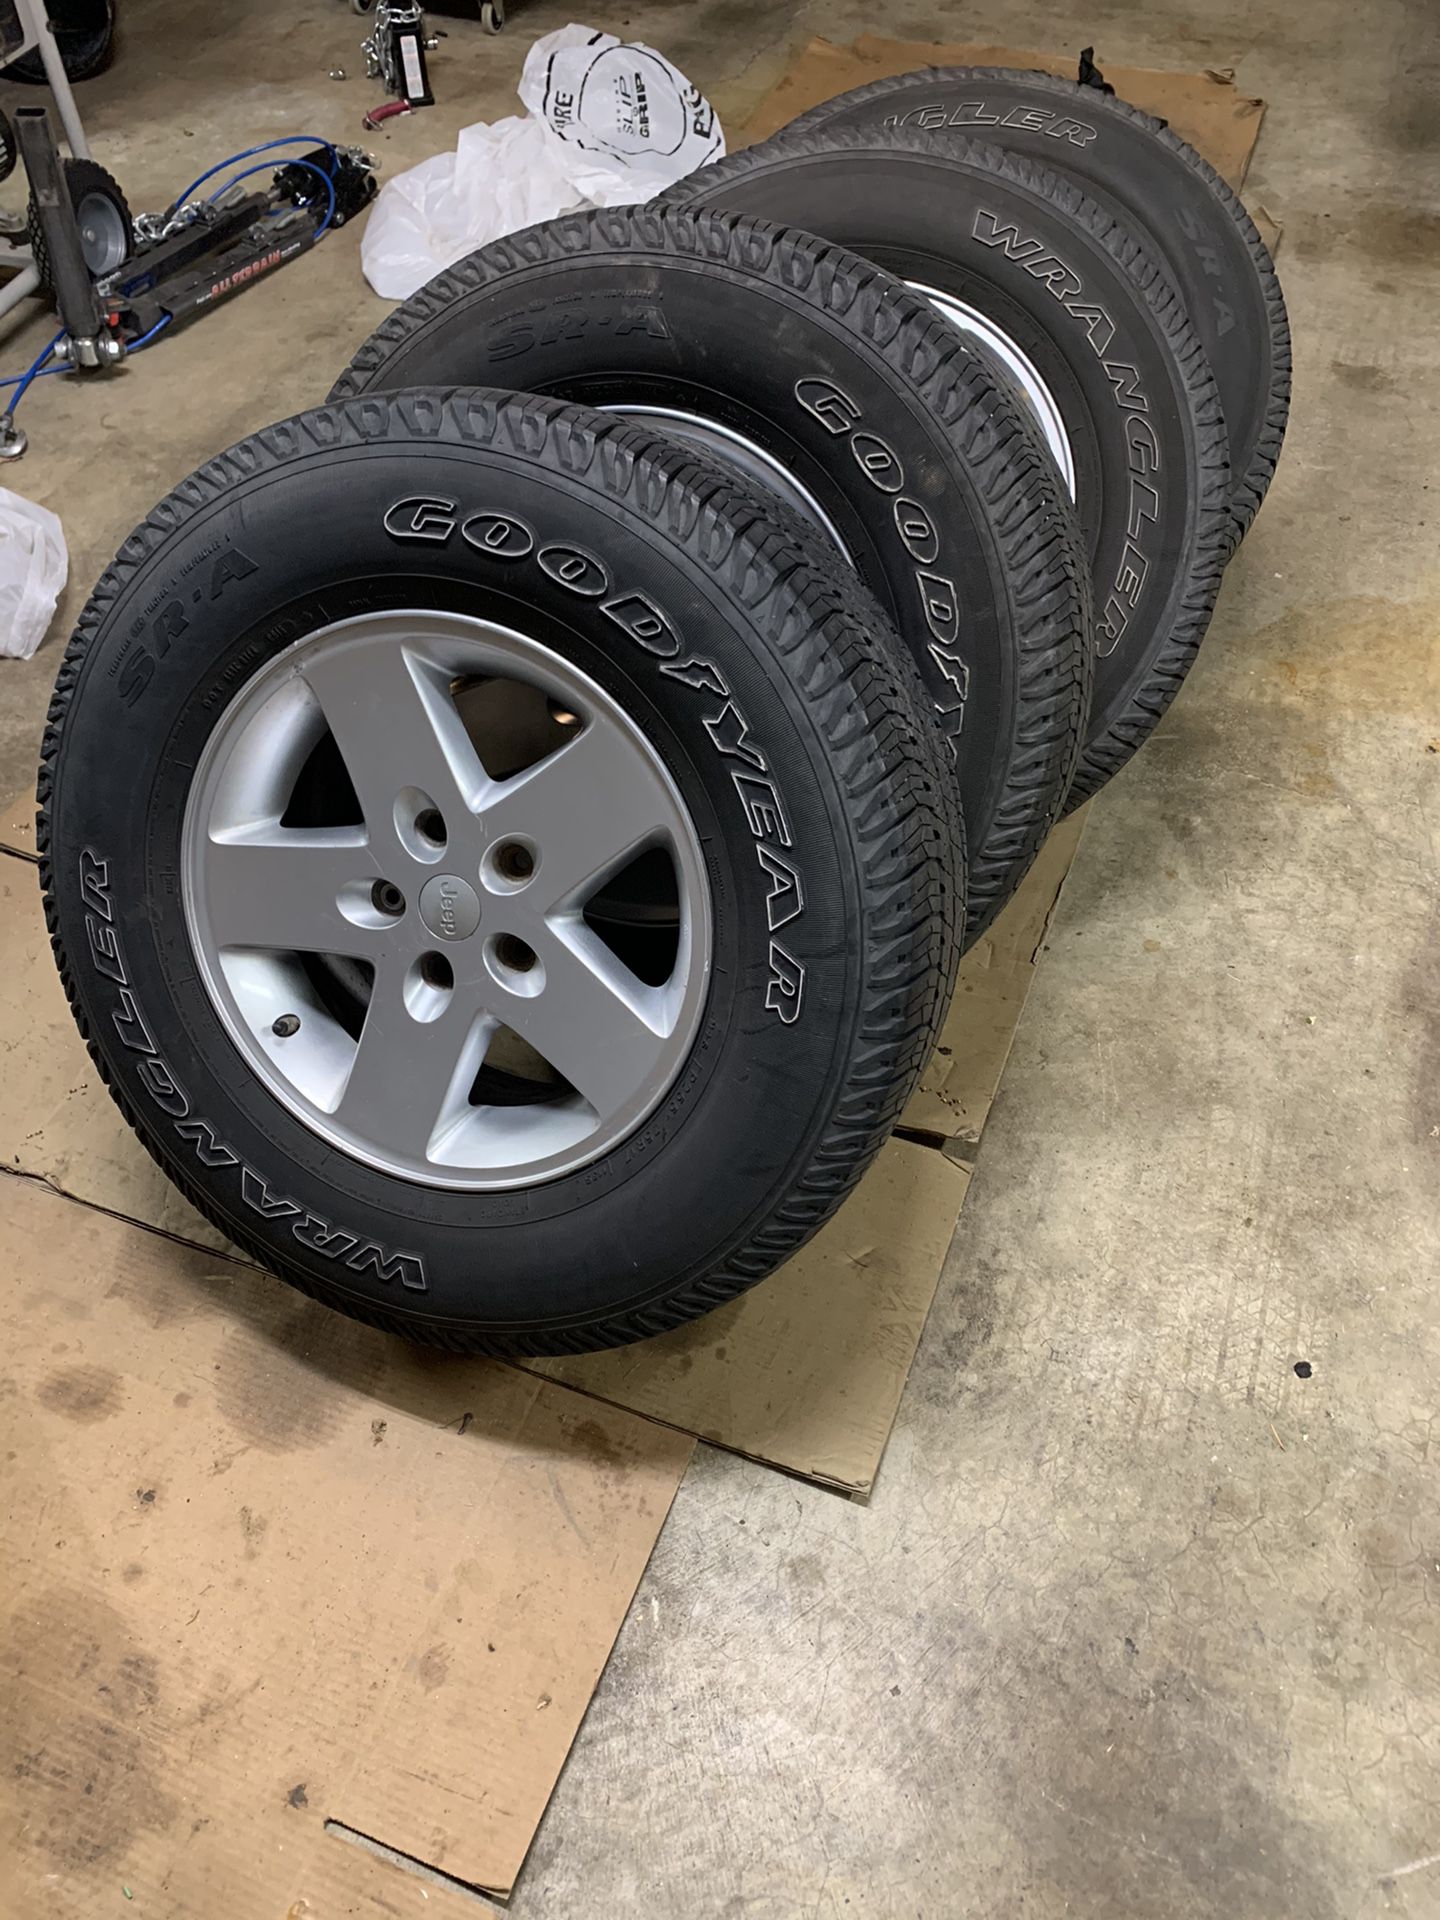 Jeep Wrangler wheels and tires.